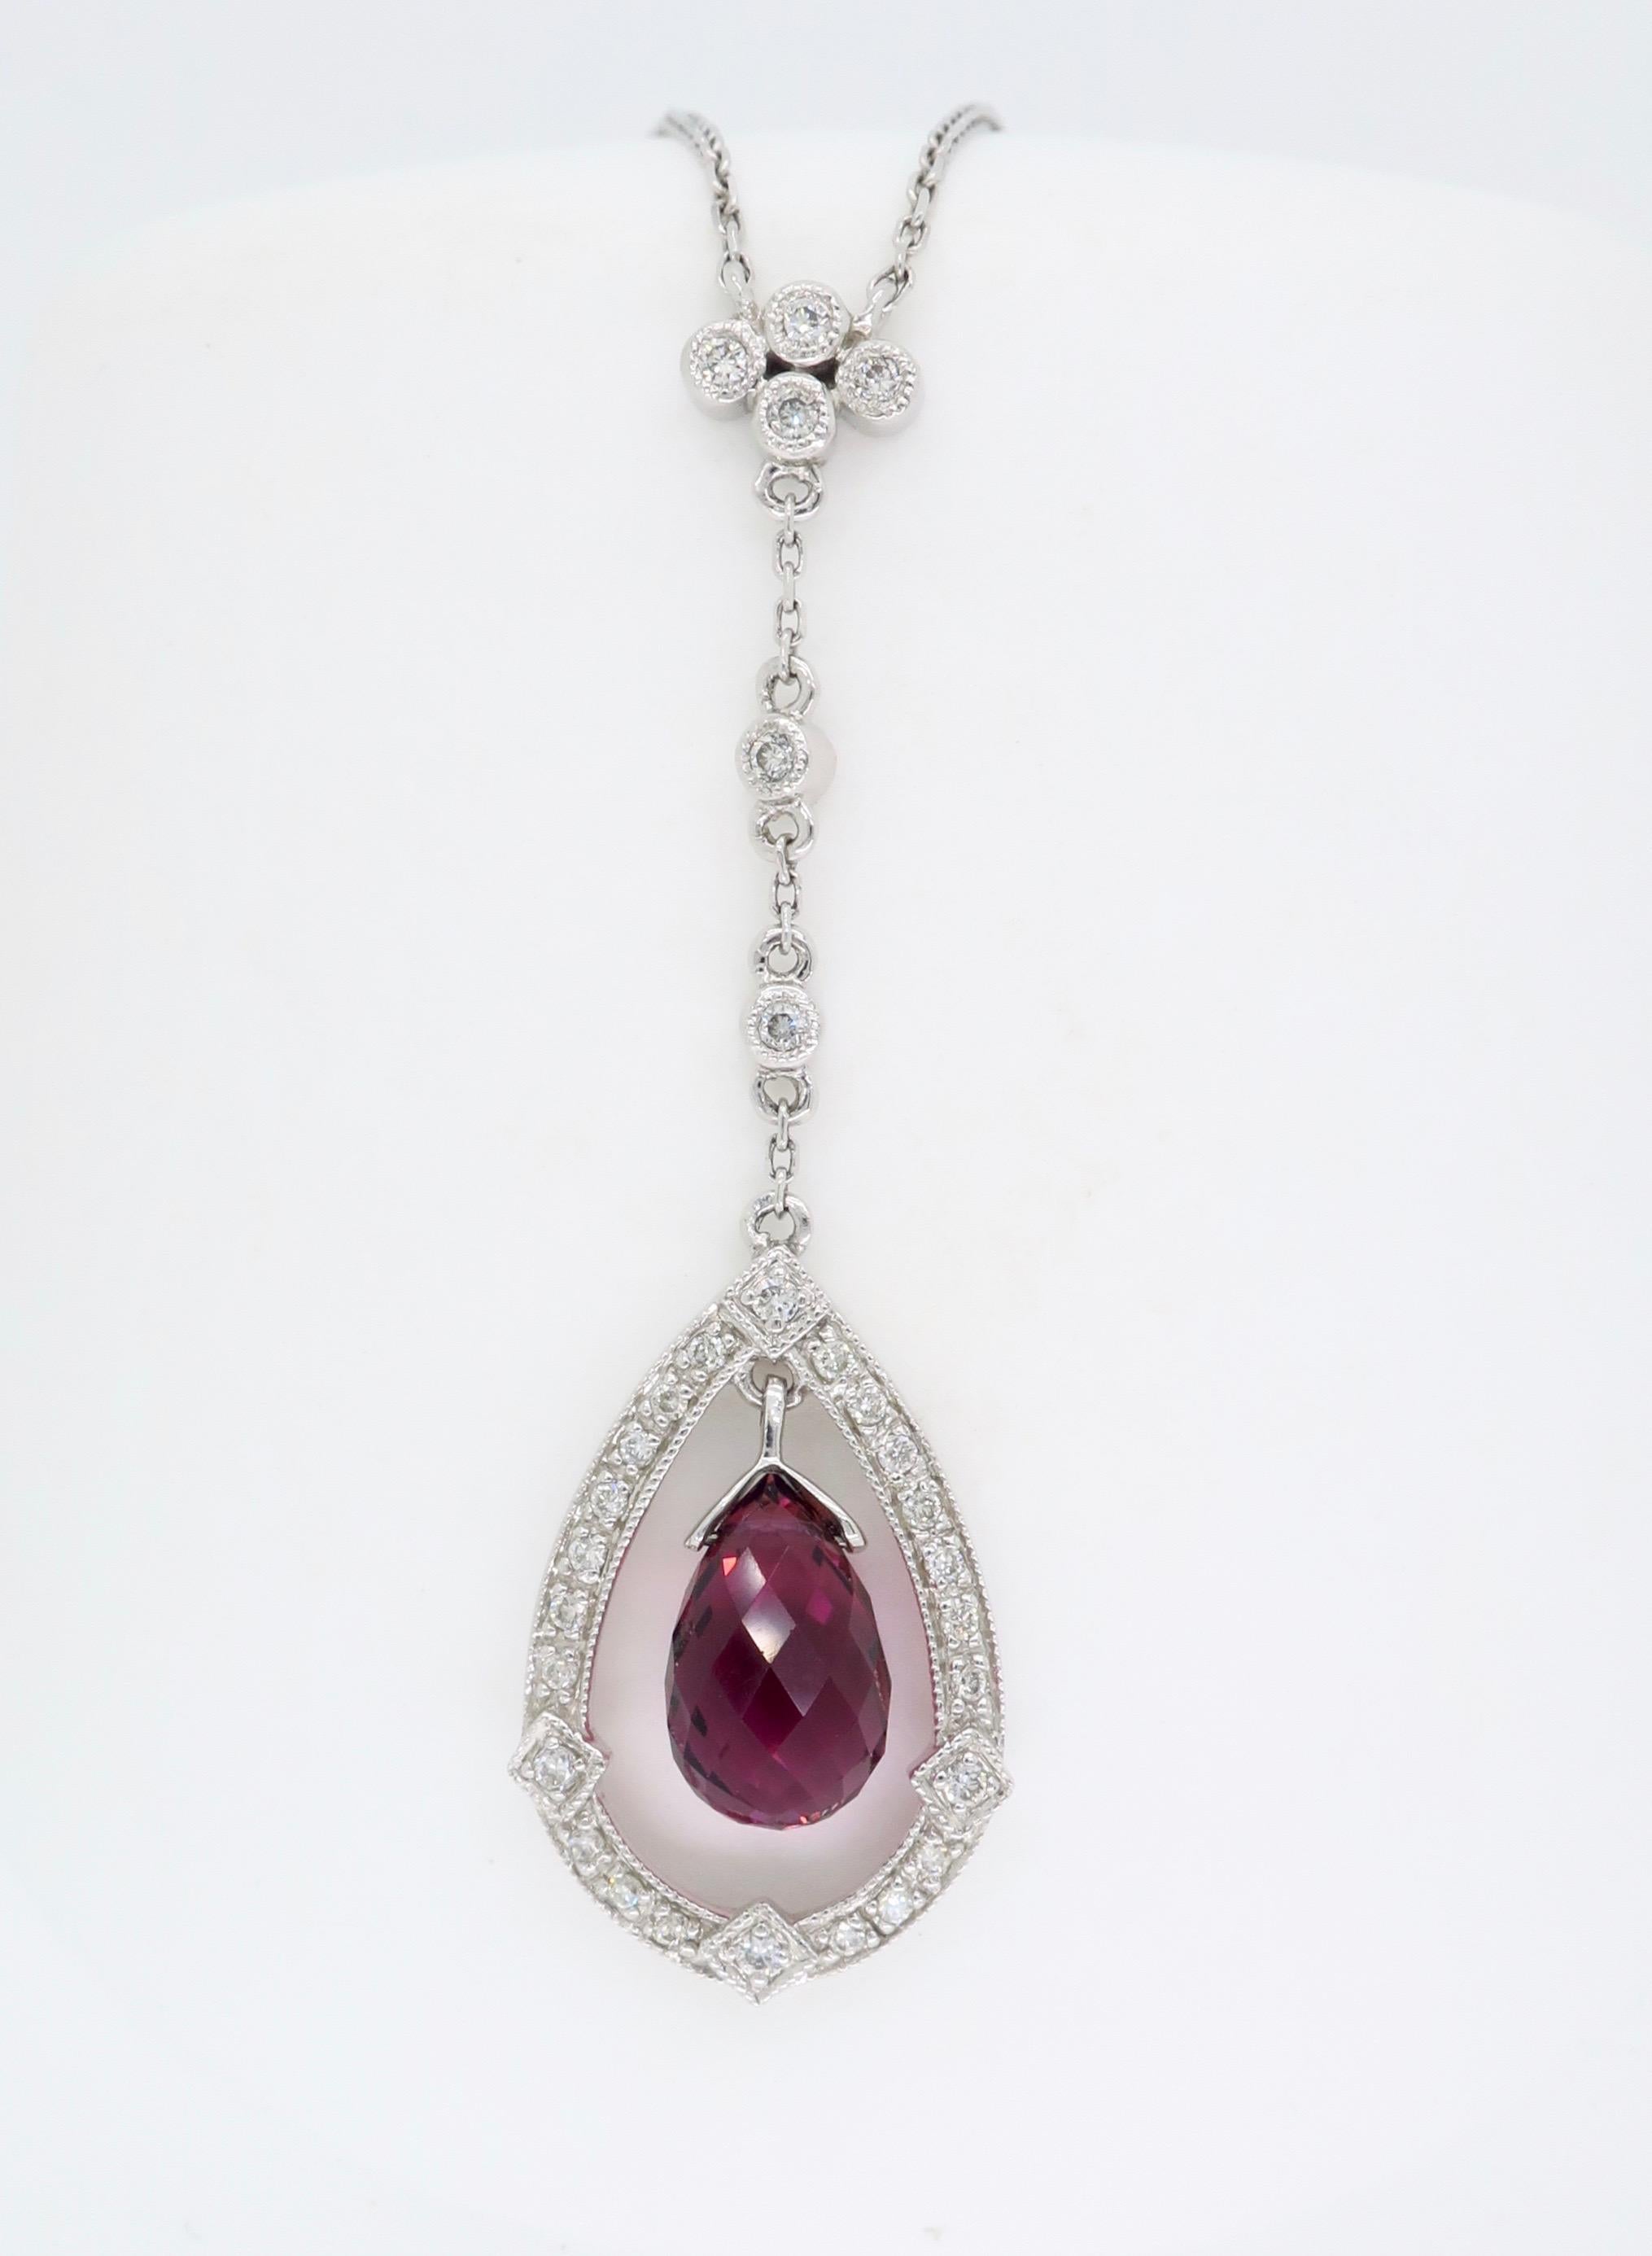 This elegant pendant features a beautiful briolette cut pink tourmaline surrounded by .22CTW of diamonds.

Pink Tourmaline & Diamond
Gemstone Carat Weight: 2.43CT Briolette Cut Pink Tourmaline
Diamond Carat Weight: .22CTW
Diamond Cut: Round